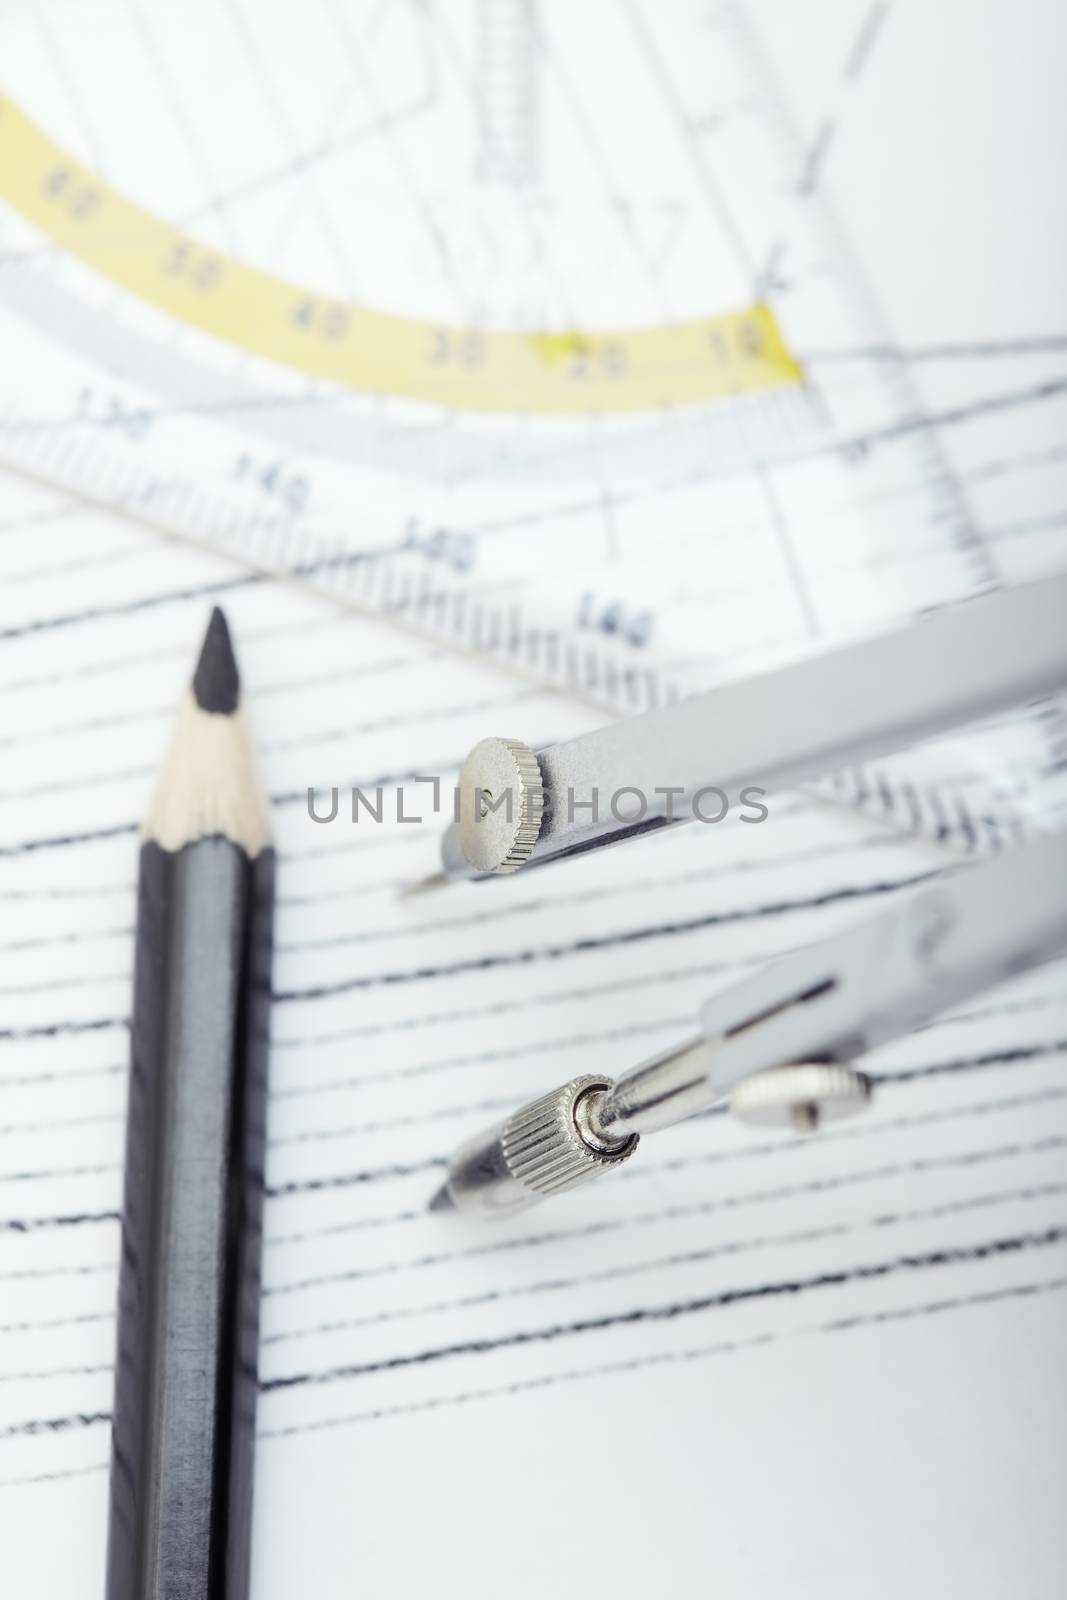 Scheme with drawing tools. Extremely close-up photo. Focus on the compasses